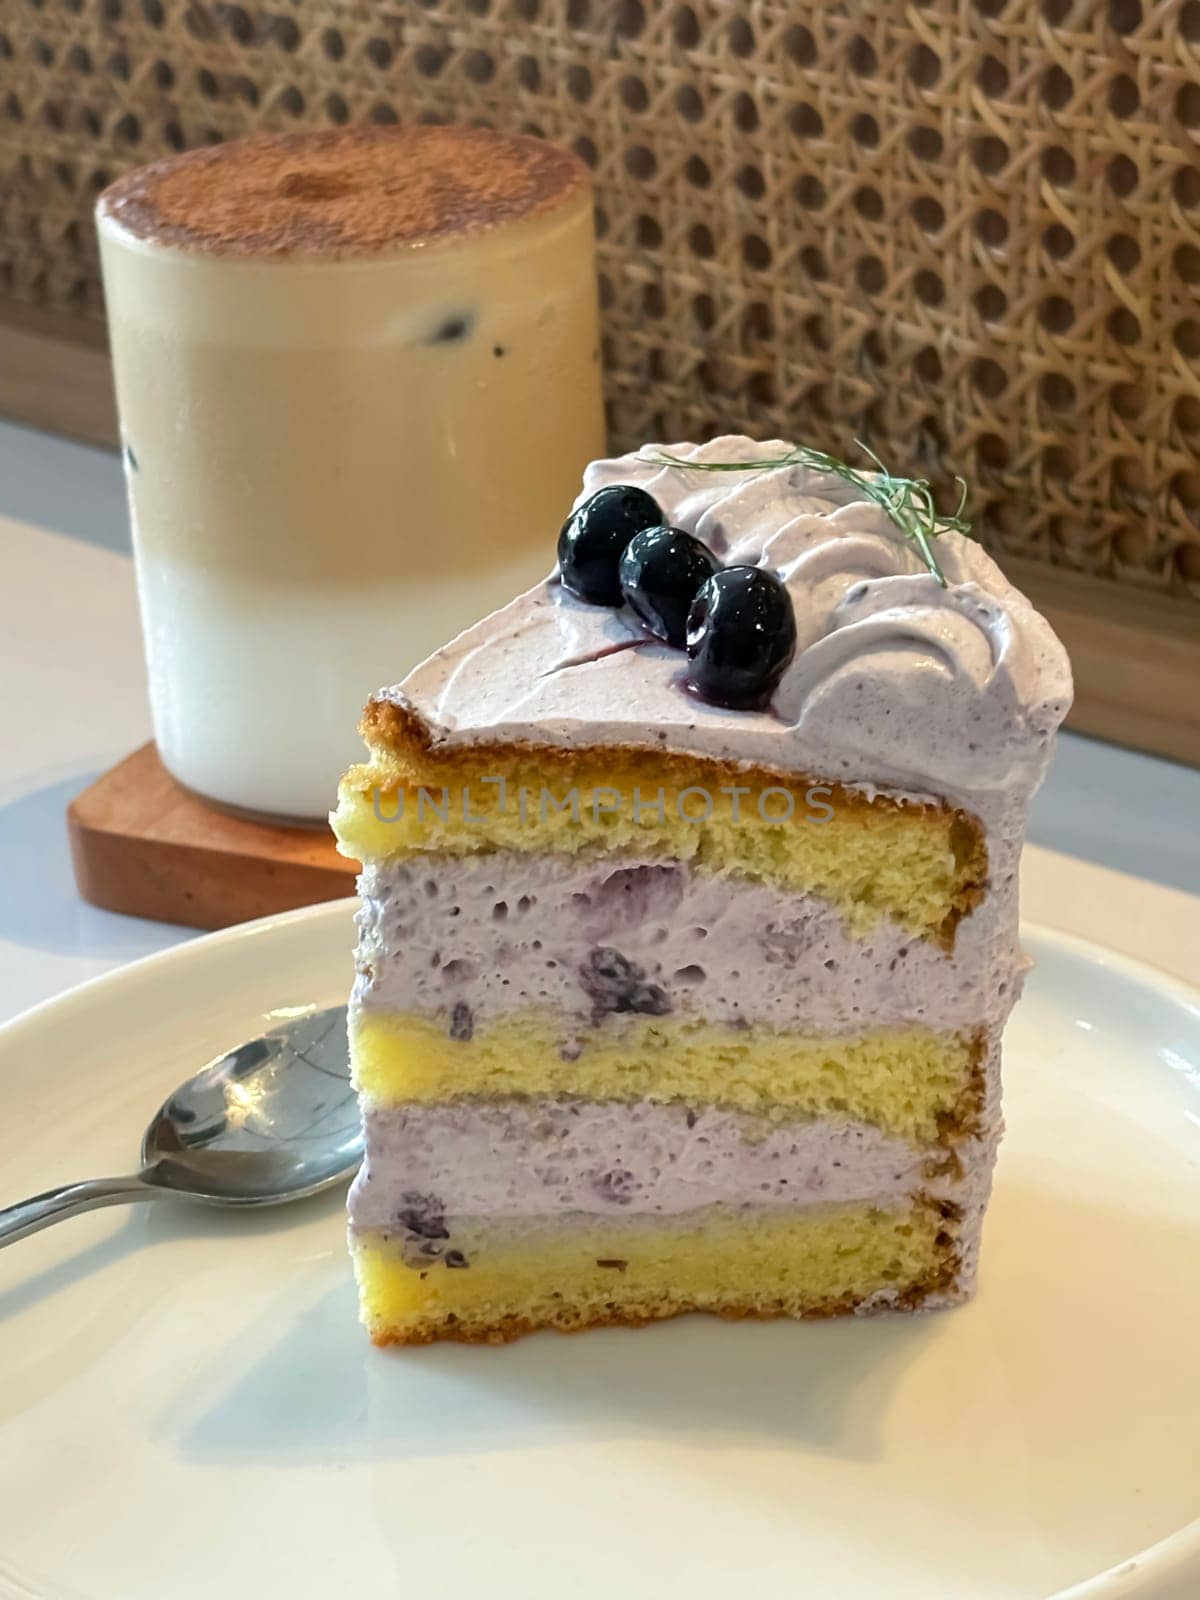 slice of blueberry cake decorated with fresh berries on white plate, delicious layered cake, top view by antoksena